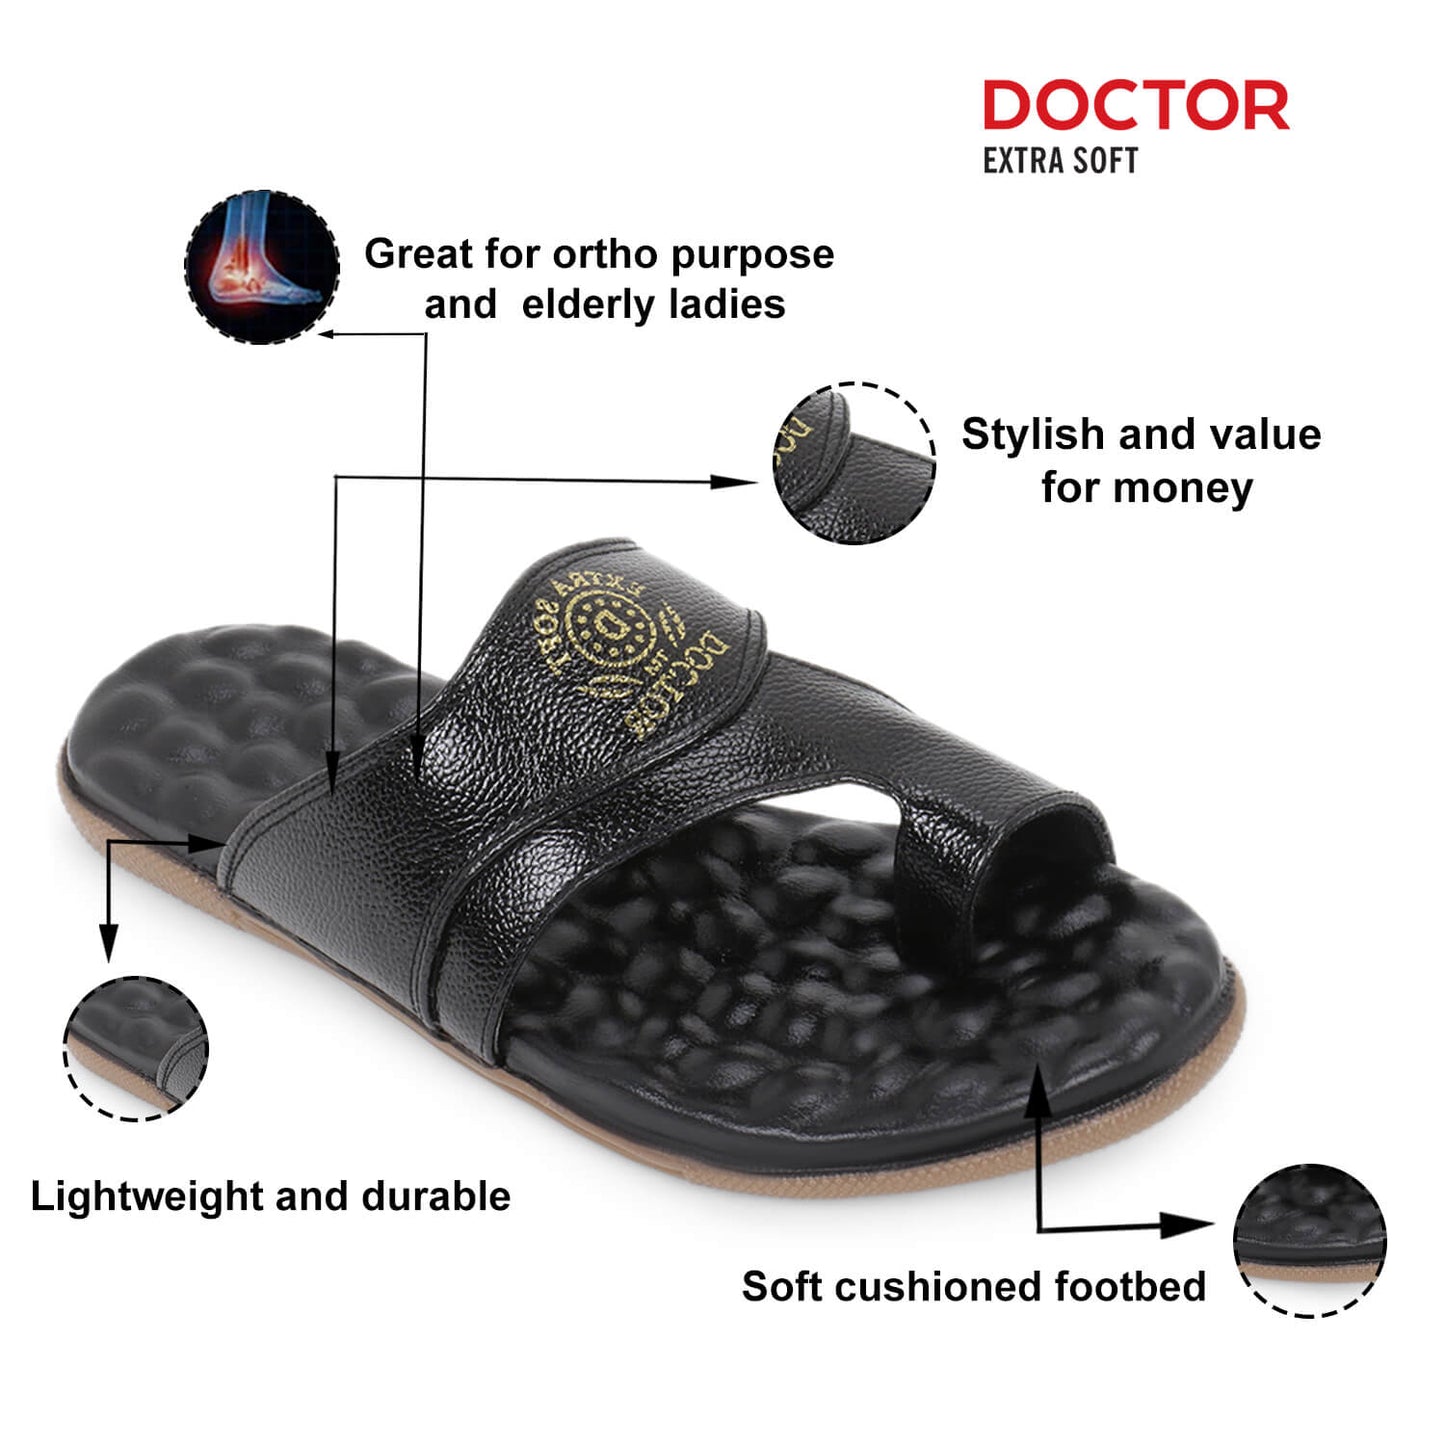 Doctor Extra Soft L-3, Orthopedic Diabetic Comfortable Footwear Daily Use Casual Wear Stylish Chappal/Sandals for Men's-Gents-Boy's